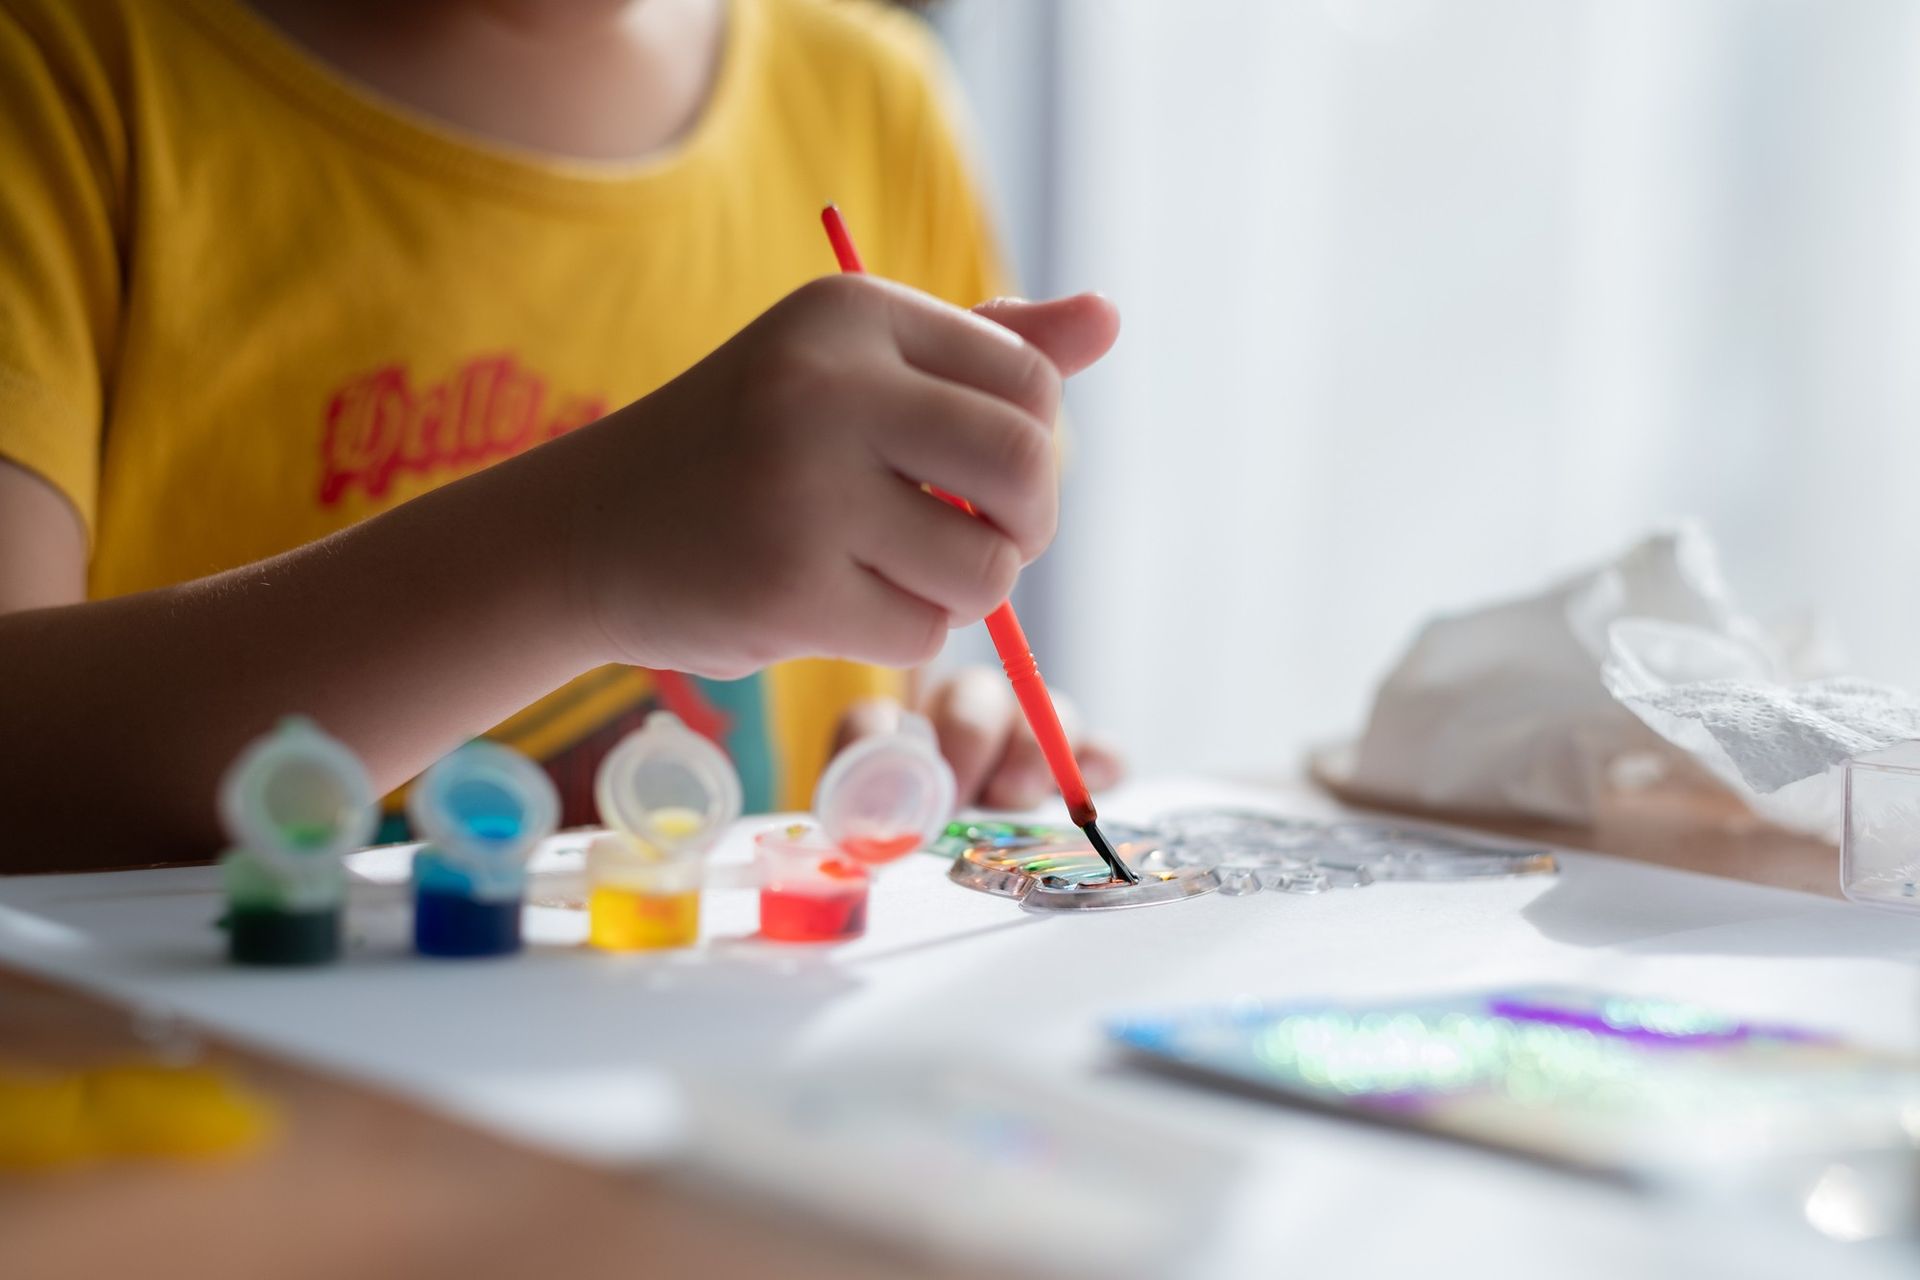 A child is painting with a brush on a piece of paper.